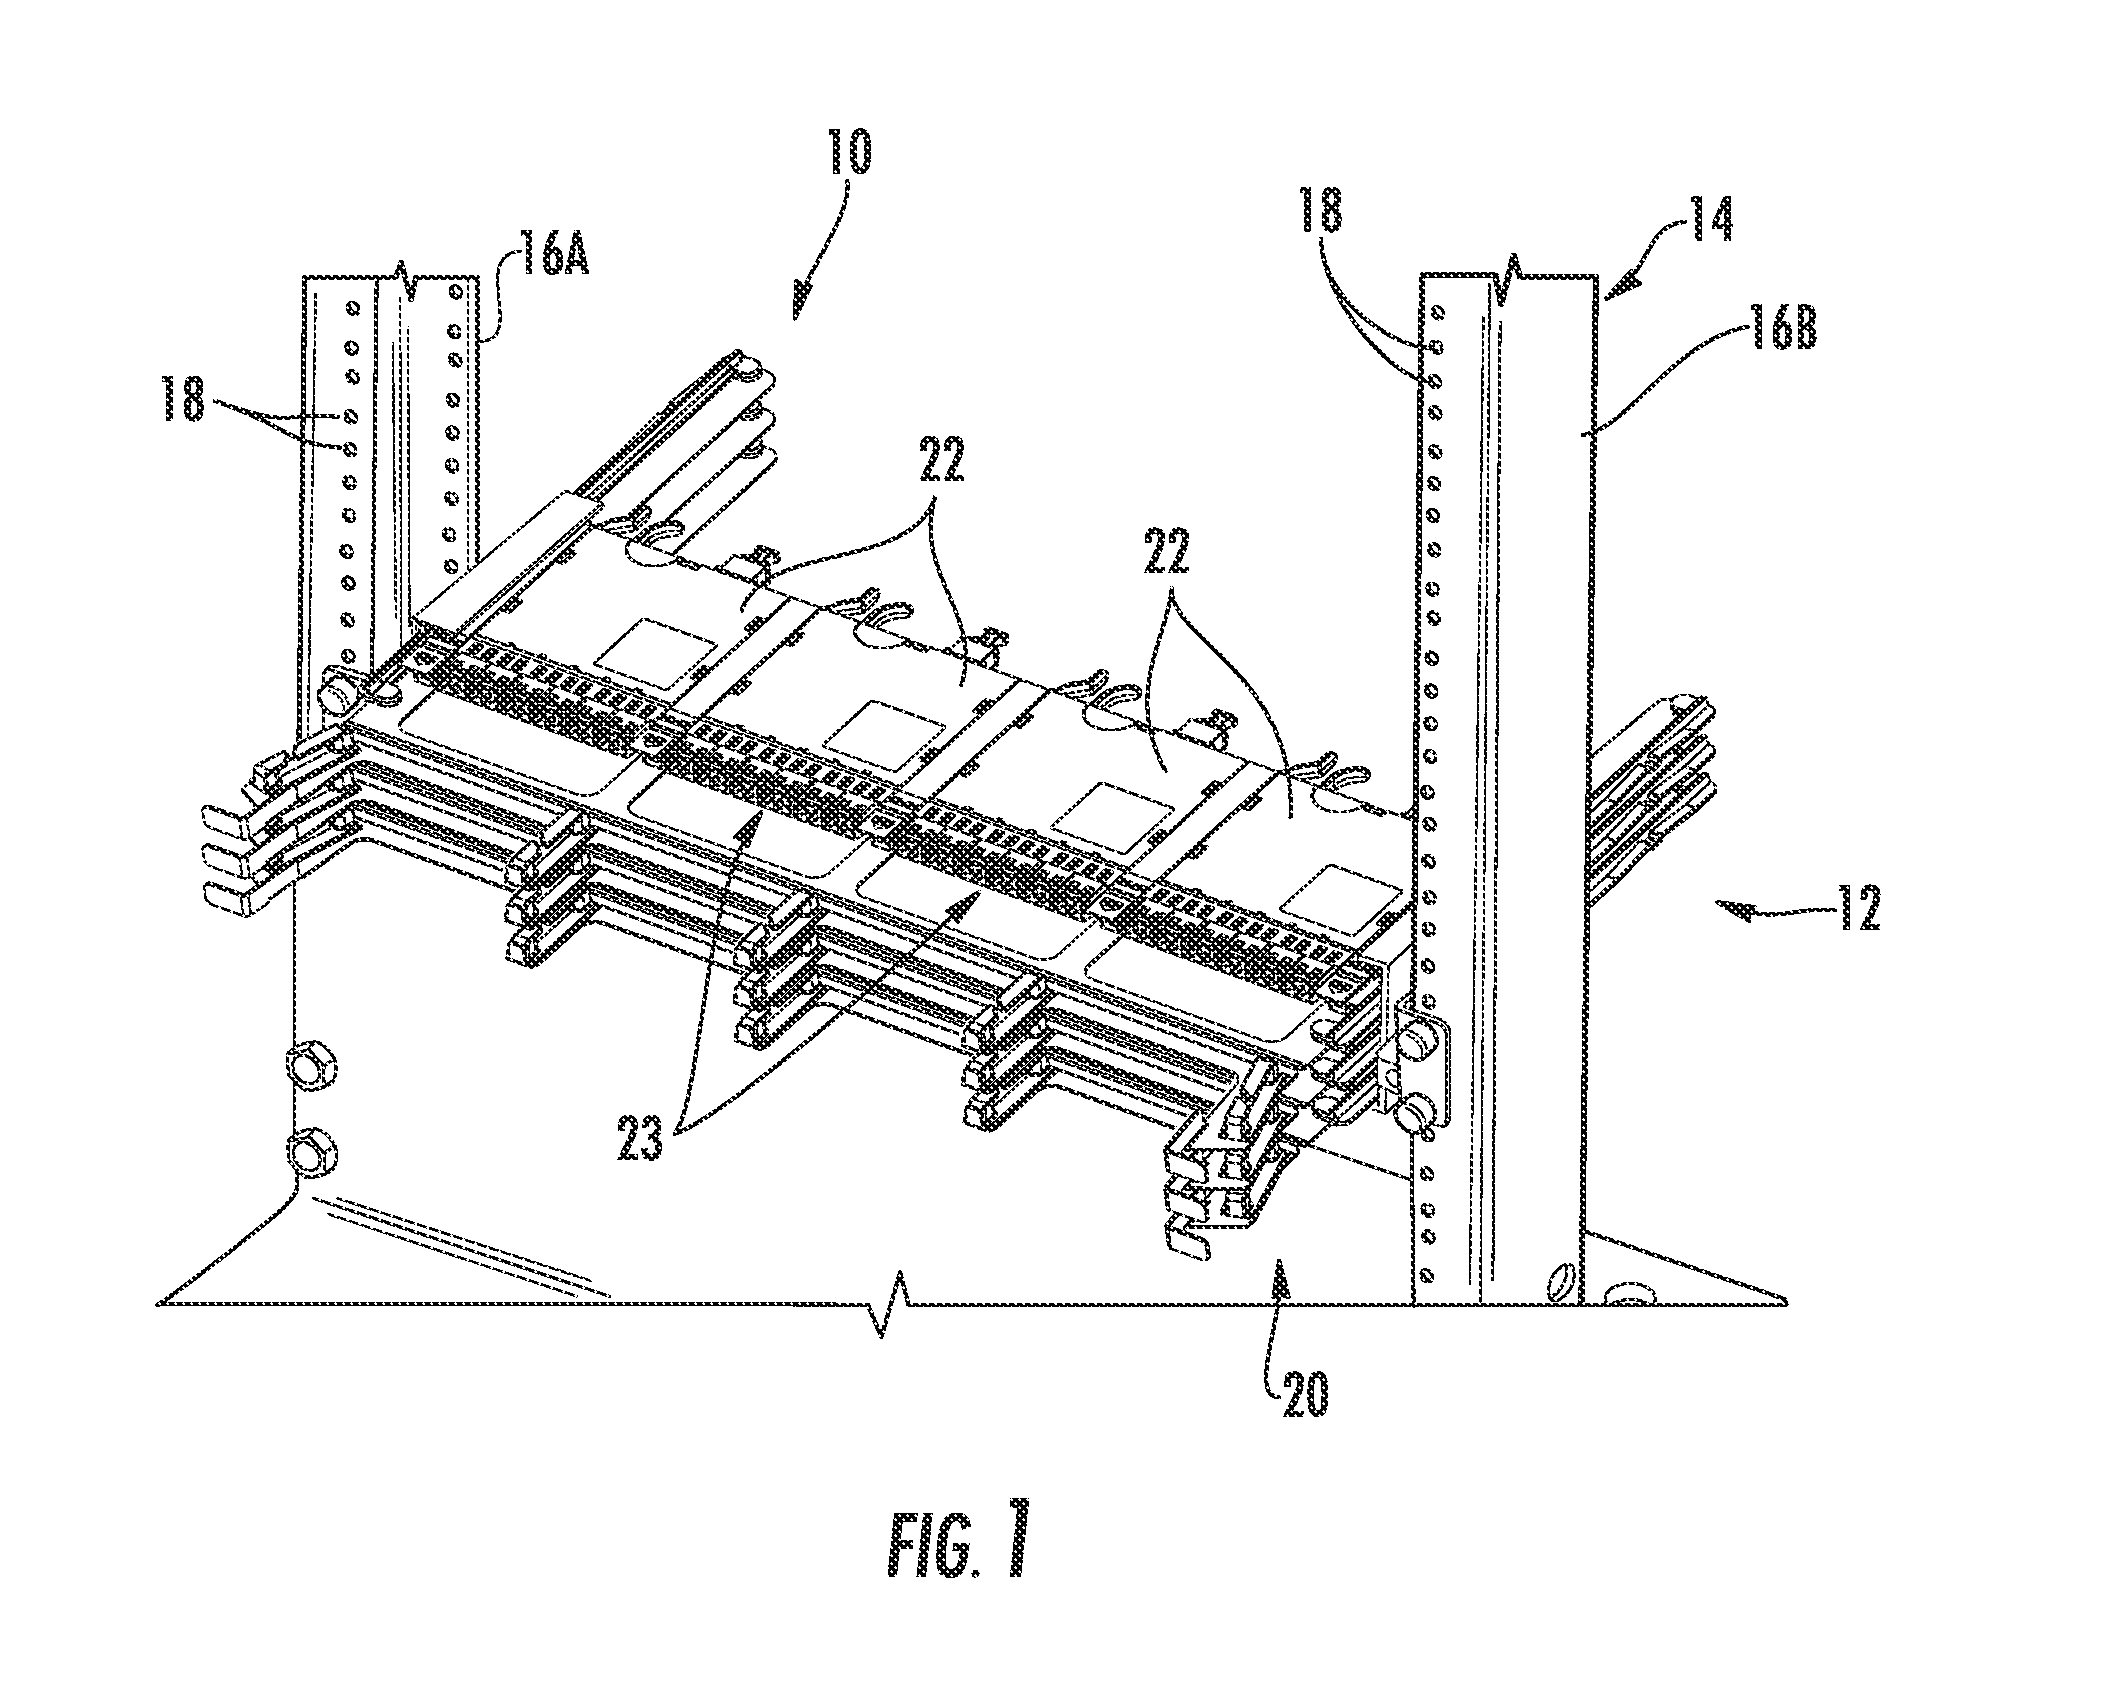 High Capacity Fiber Optic Connection Infrastructure Apparatus